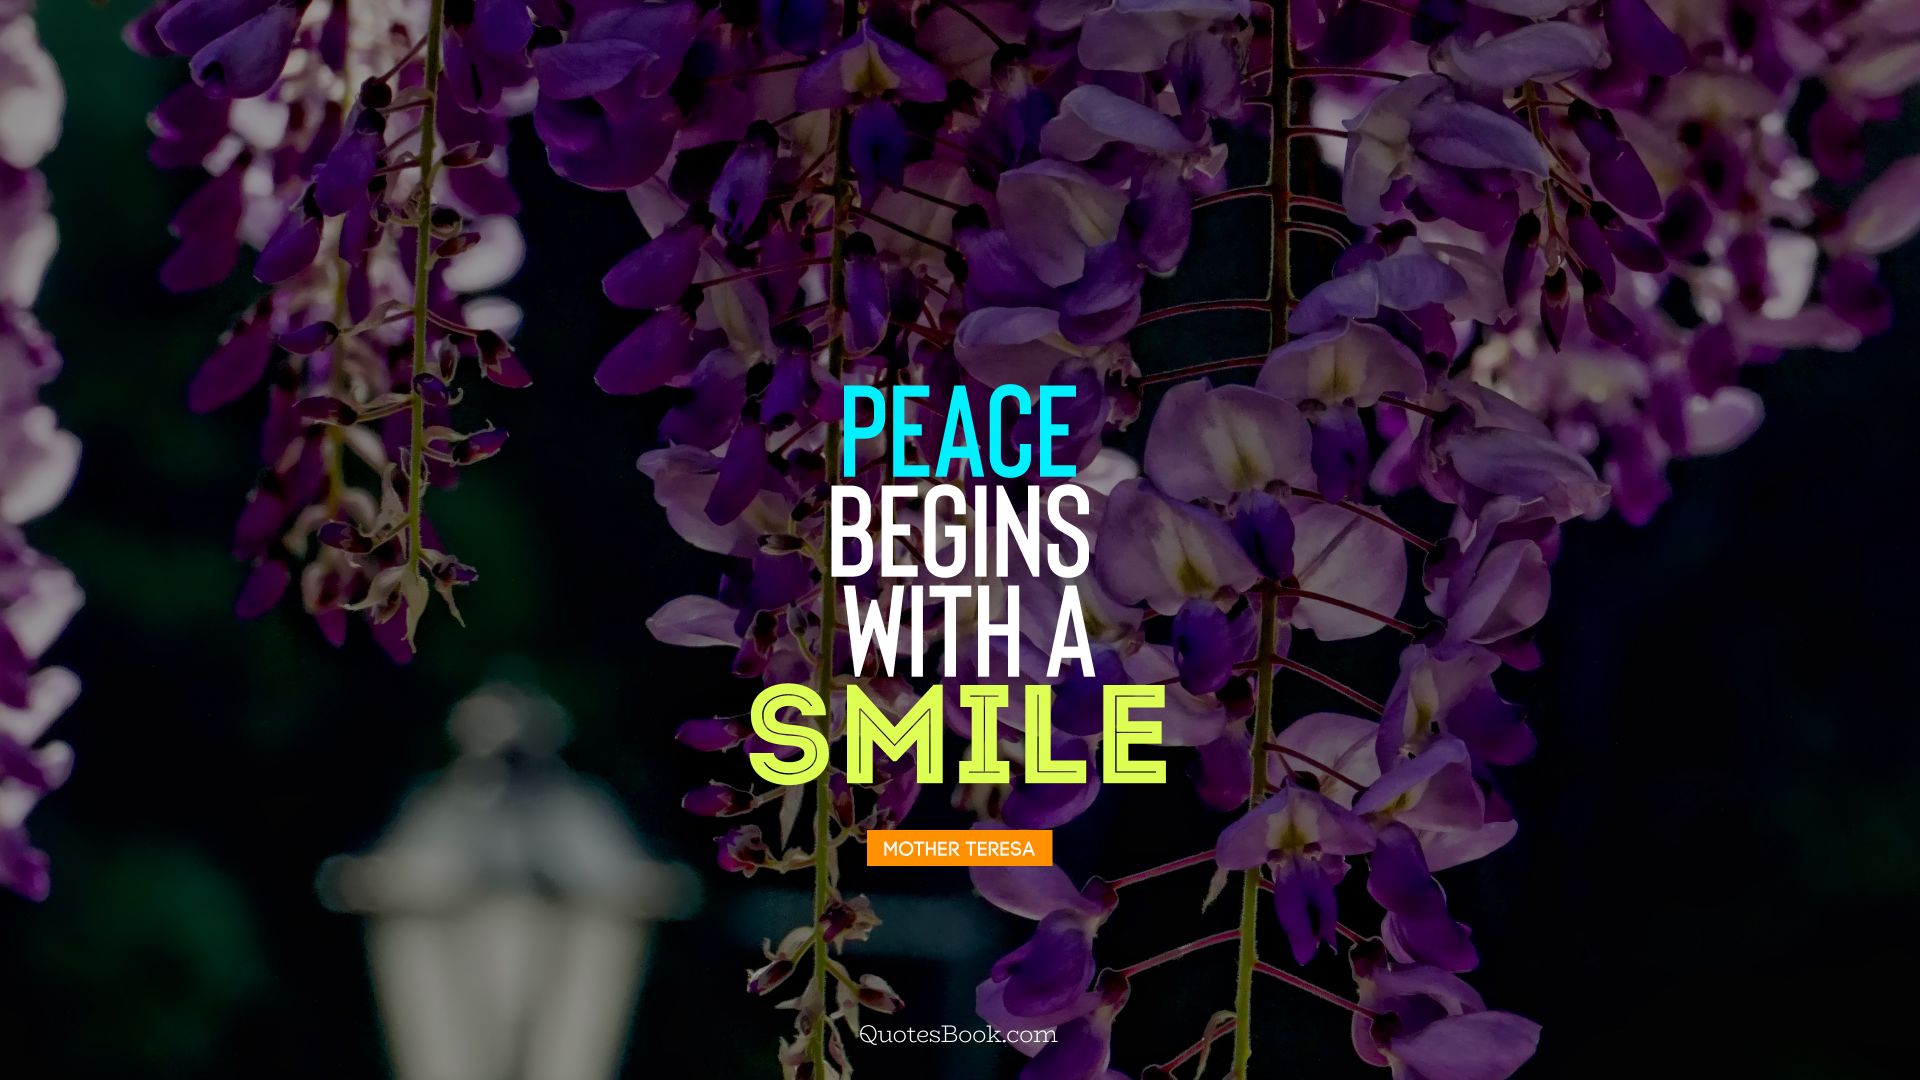 Peace begins with a smile. - Quote by Mother Teresa